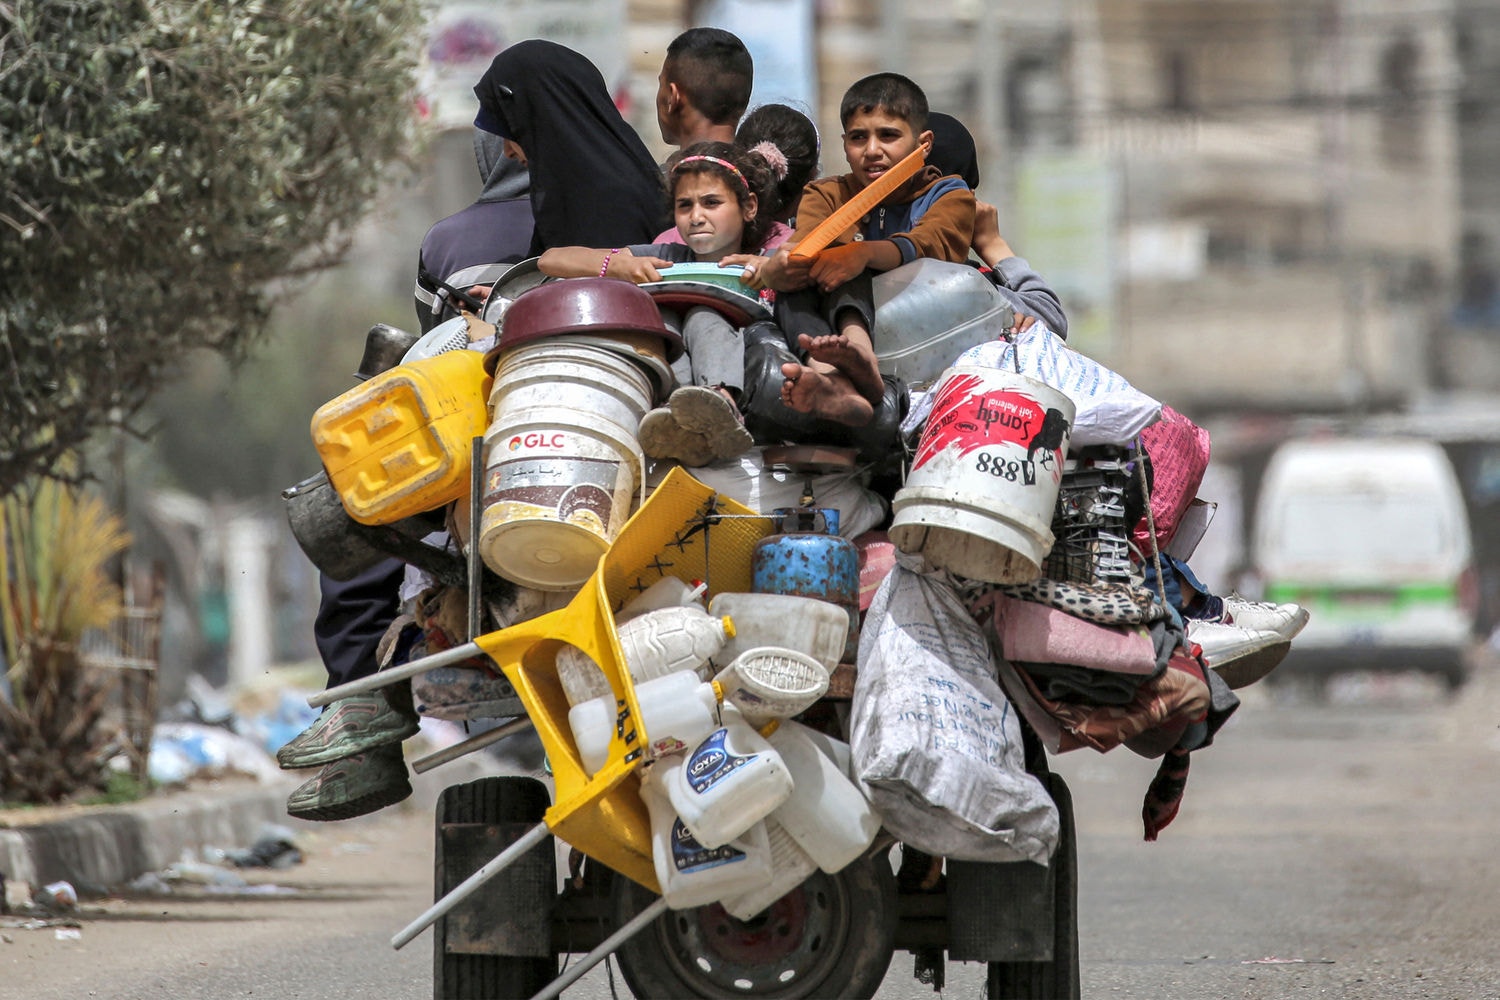 A man, woman, and children ride in the back of a tricycle loaded with belongings and other items as they flee bound for Khan Yunis, in Rafah in the southern Gaza Strip on May 11, 2024 amid the ongoing conflict in the Palestinian territory between Israel and Hamas. (Photo by AFP)